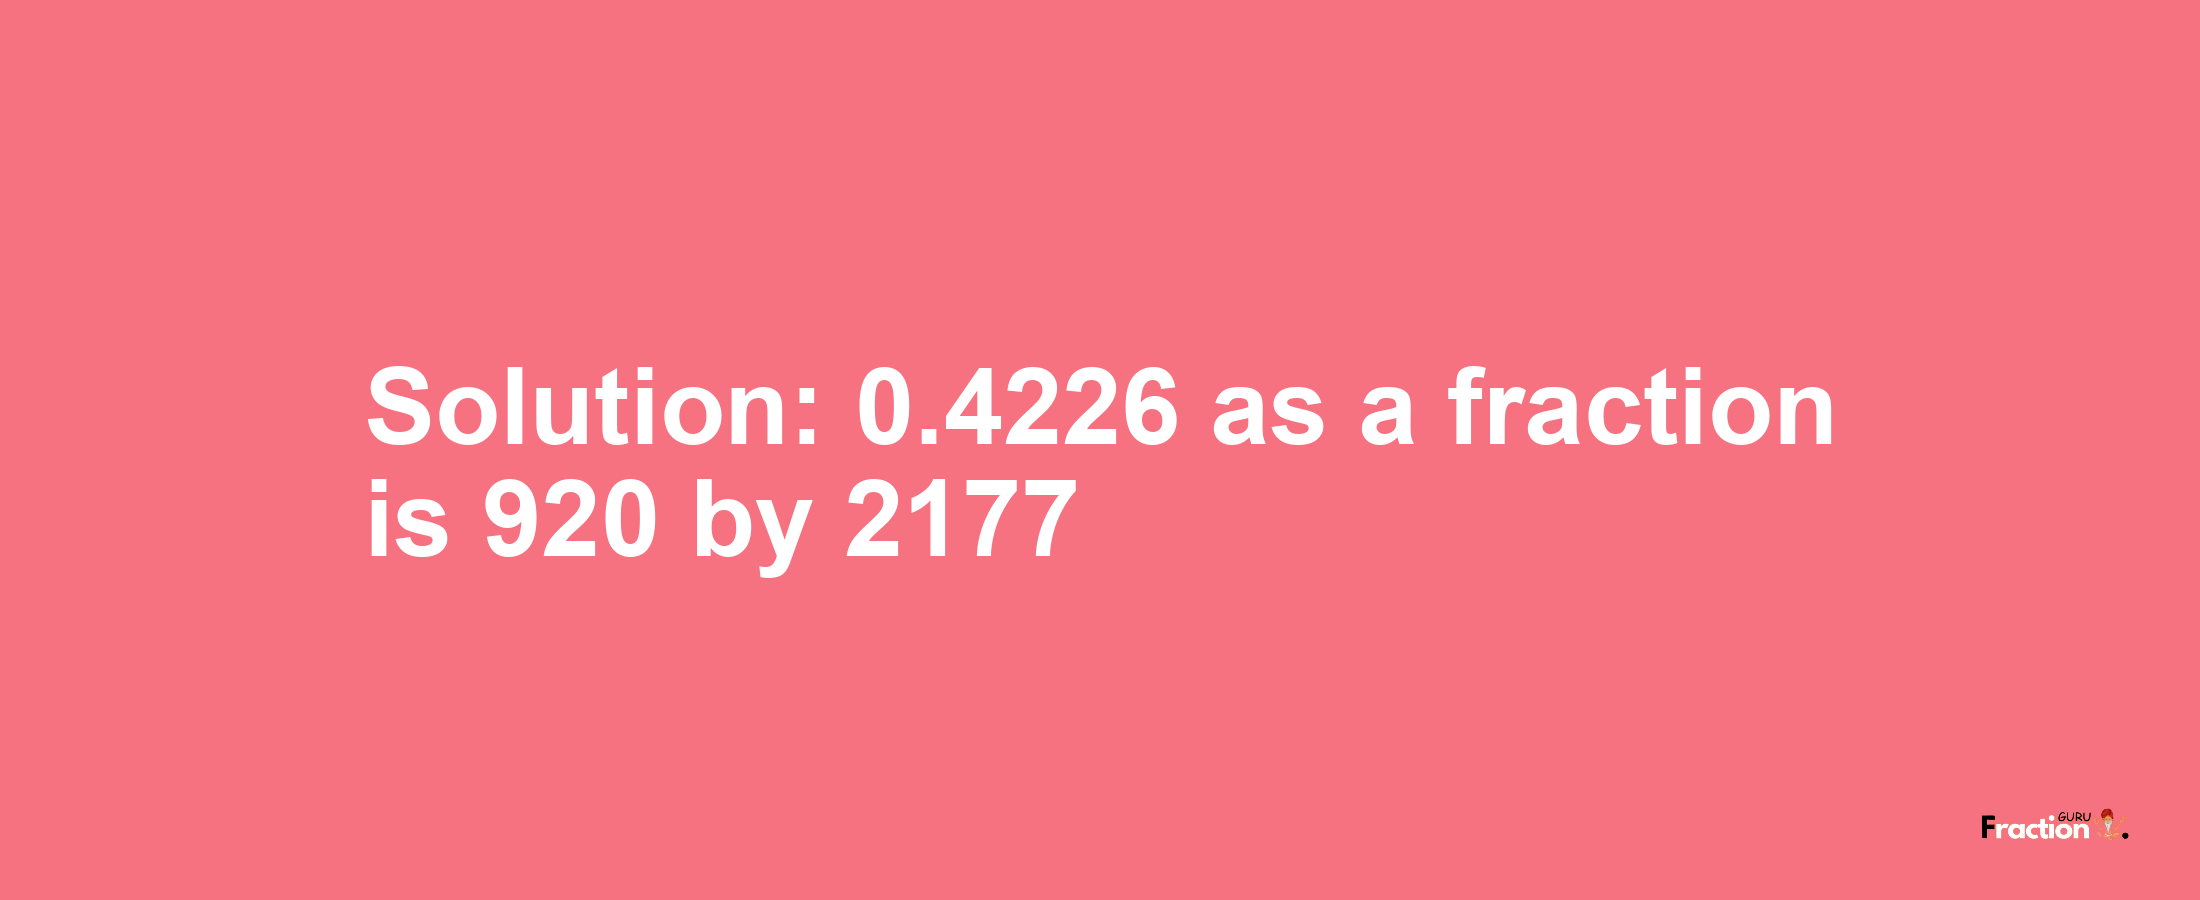 Solution:0.4226 as a fraction is 920/2177